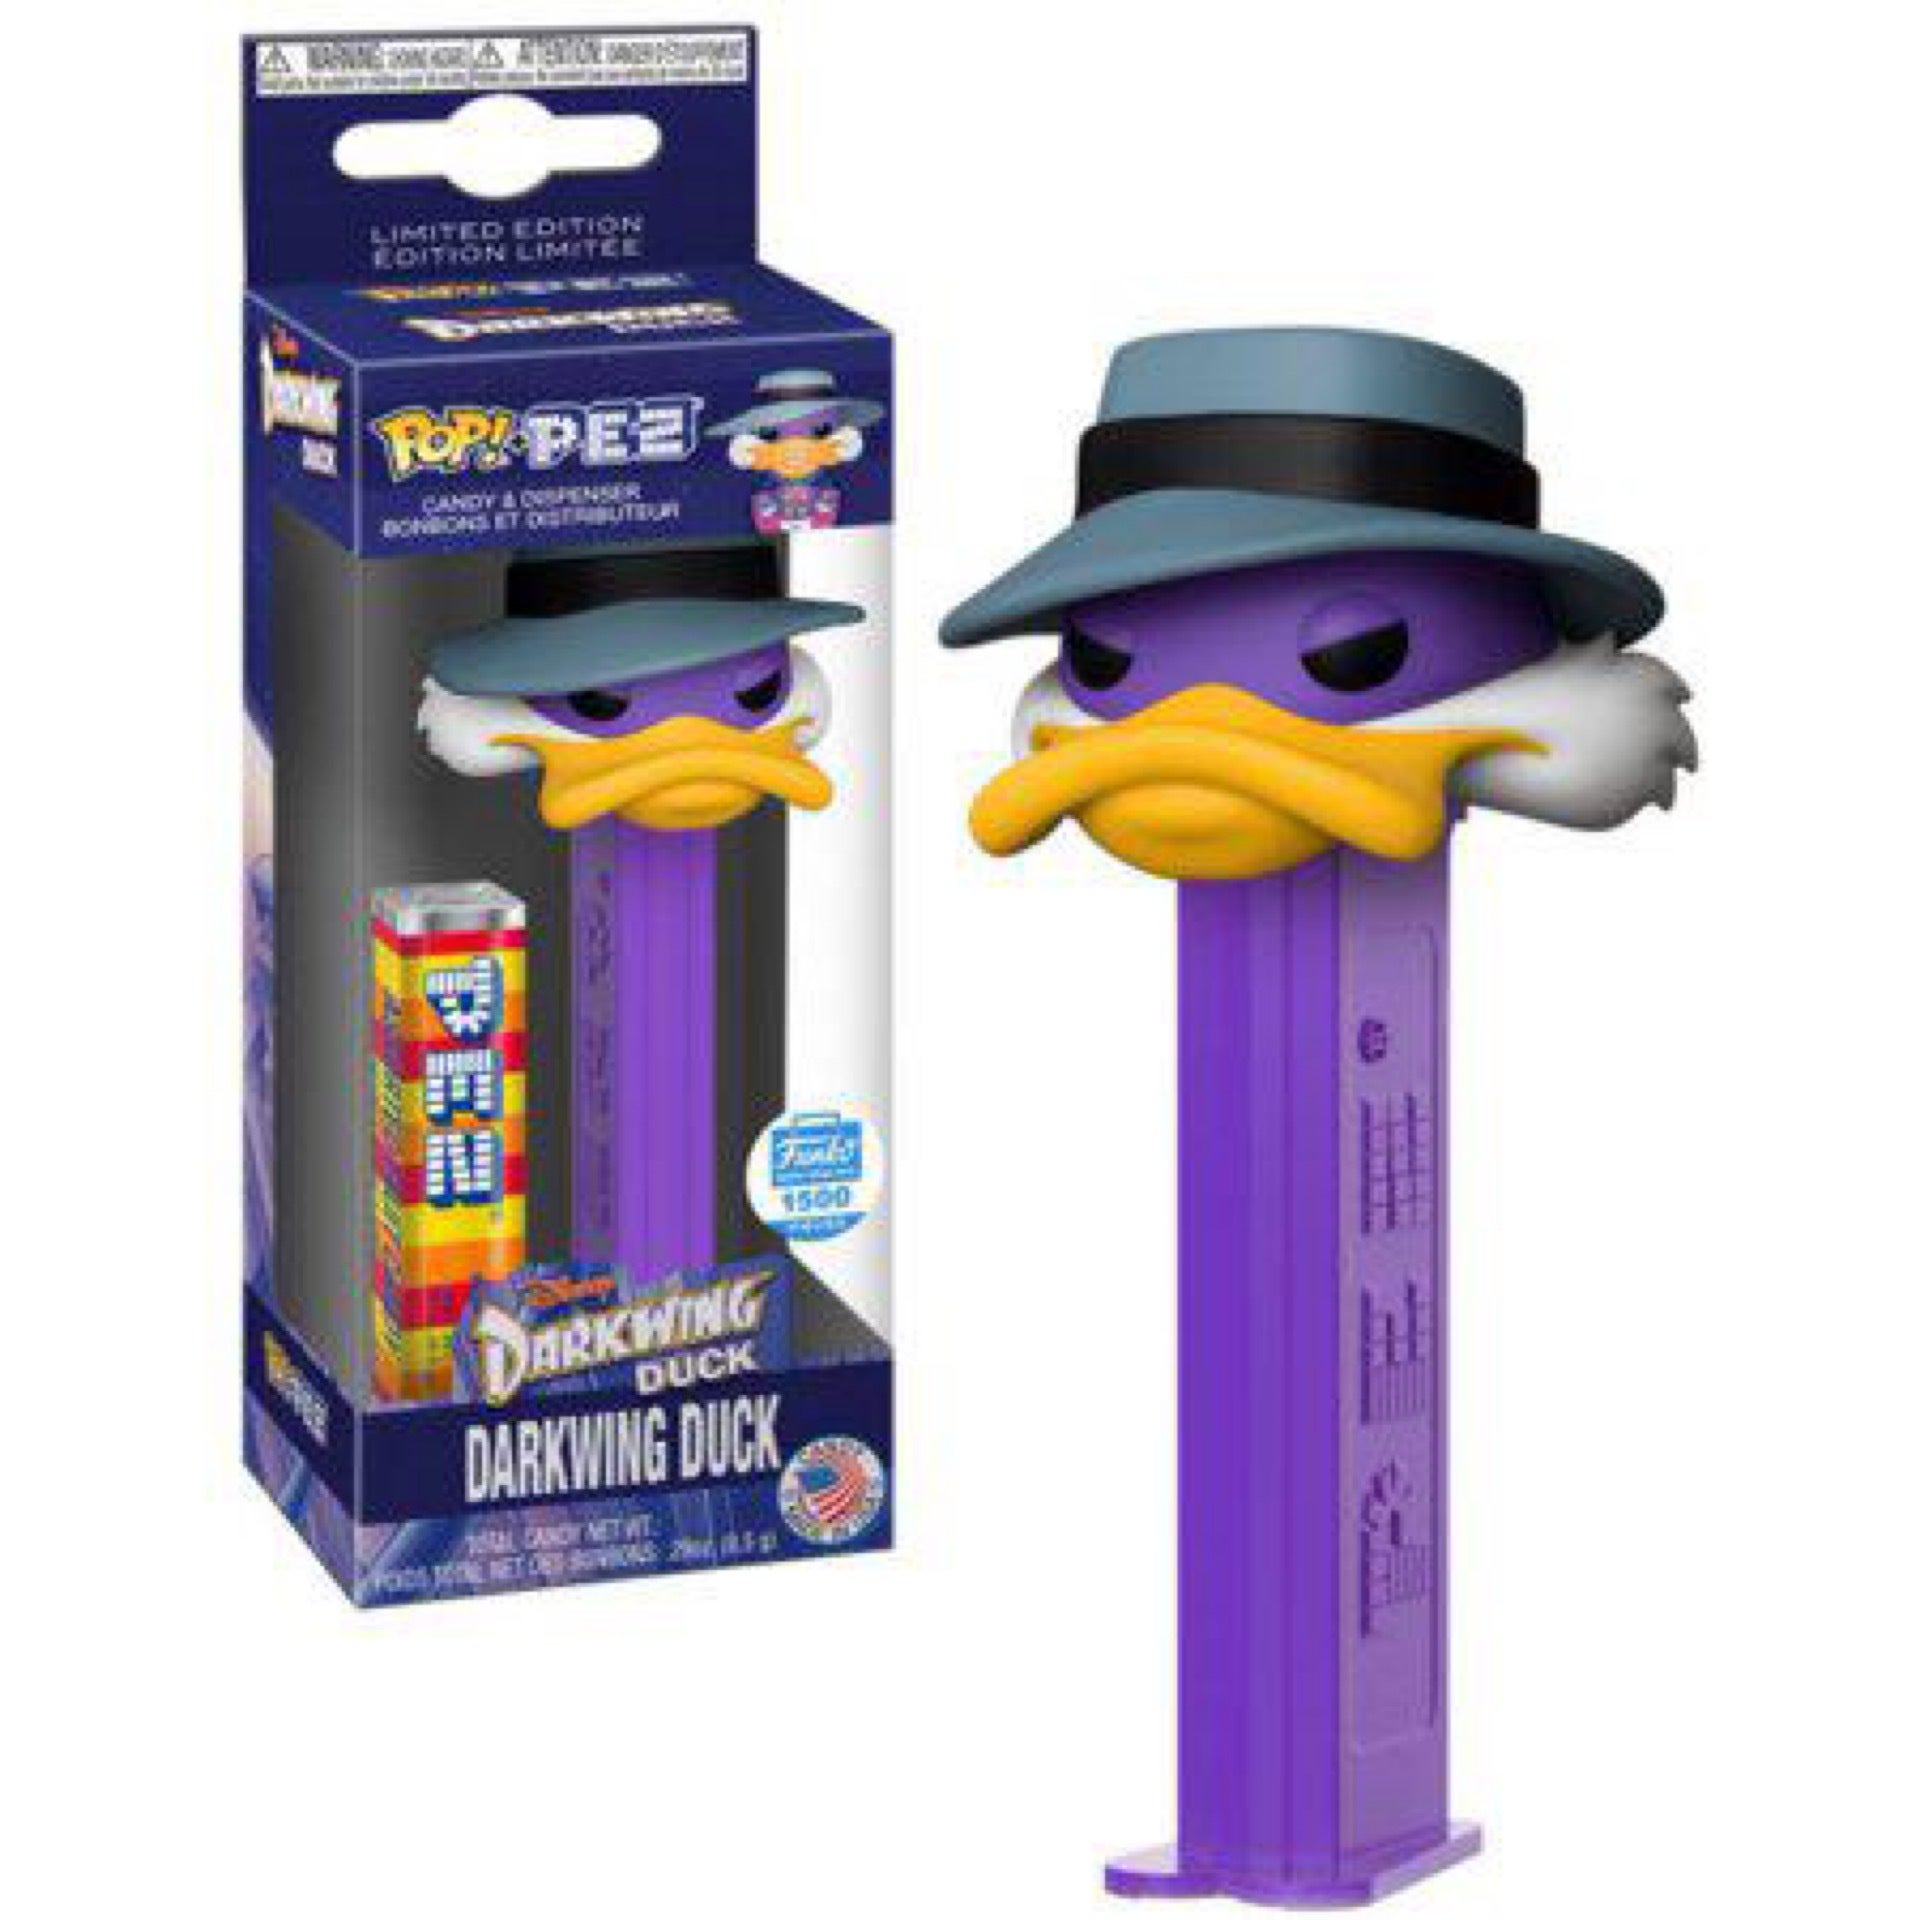 Funko Pop Darkwing Duck Candy Dispenser | BobaKhan - Vintage and Action Figures, Toys and Collectibles!